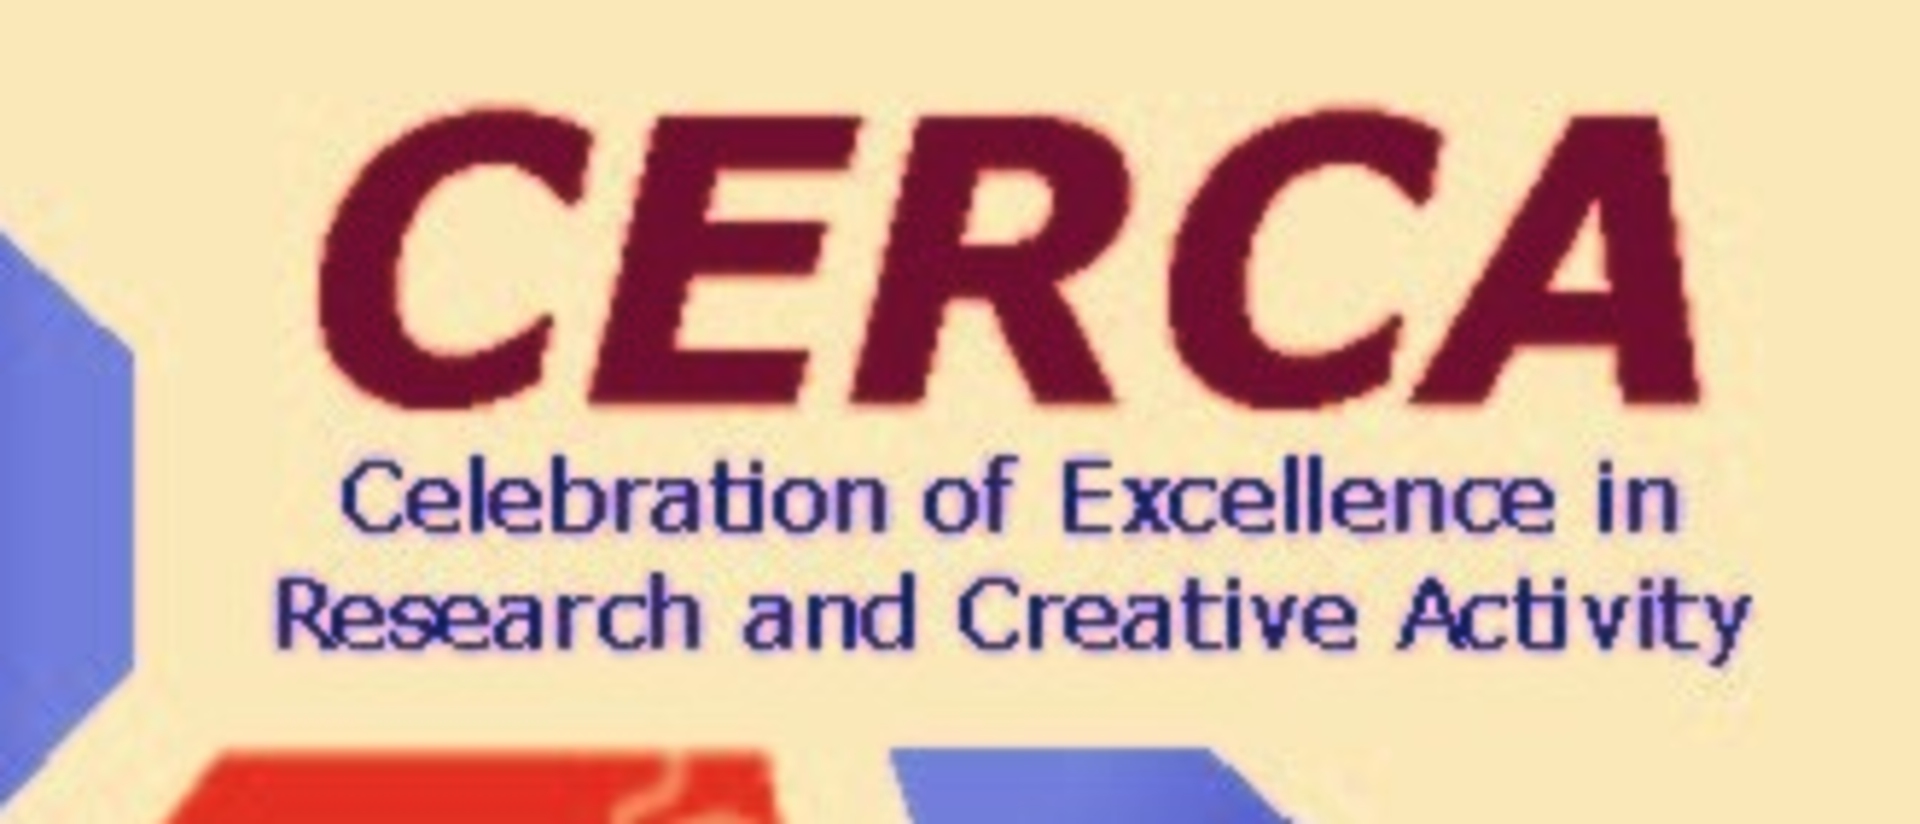 Celebration of Excellence in Research and Creative Activities